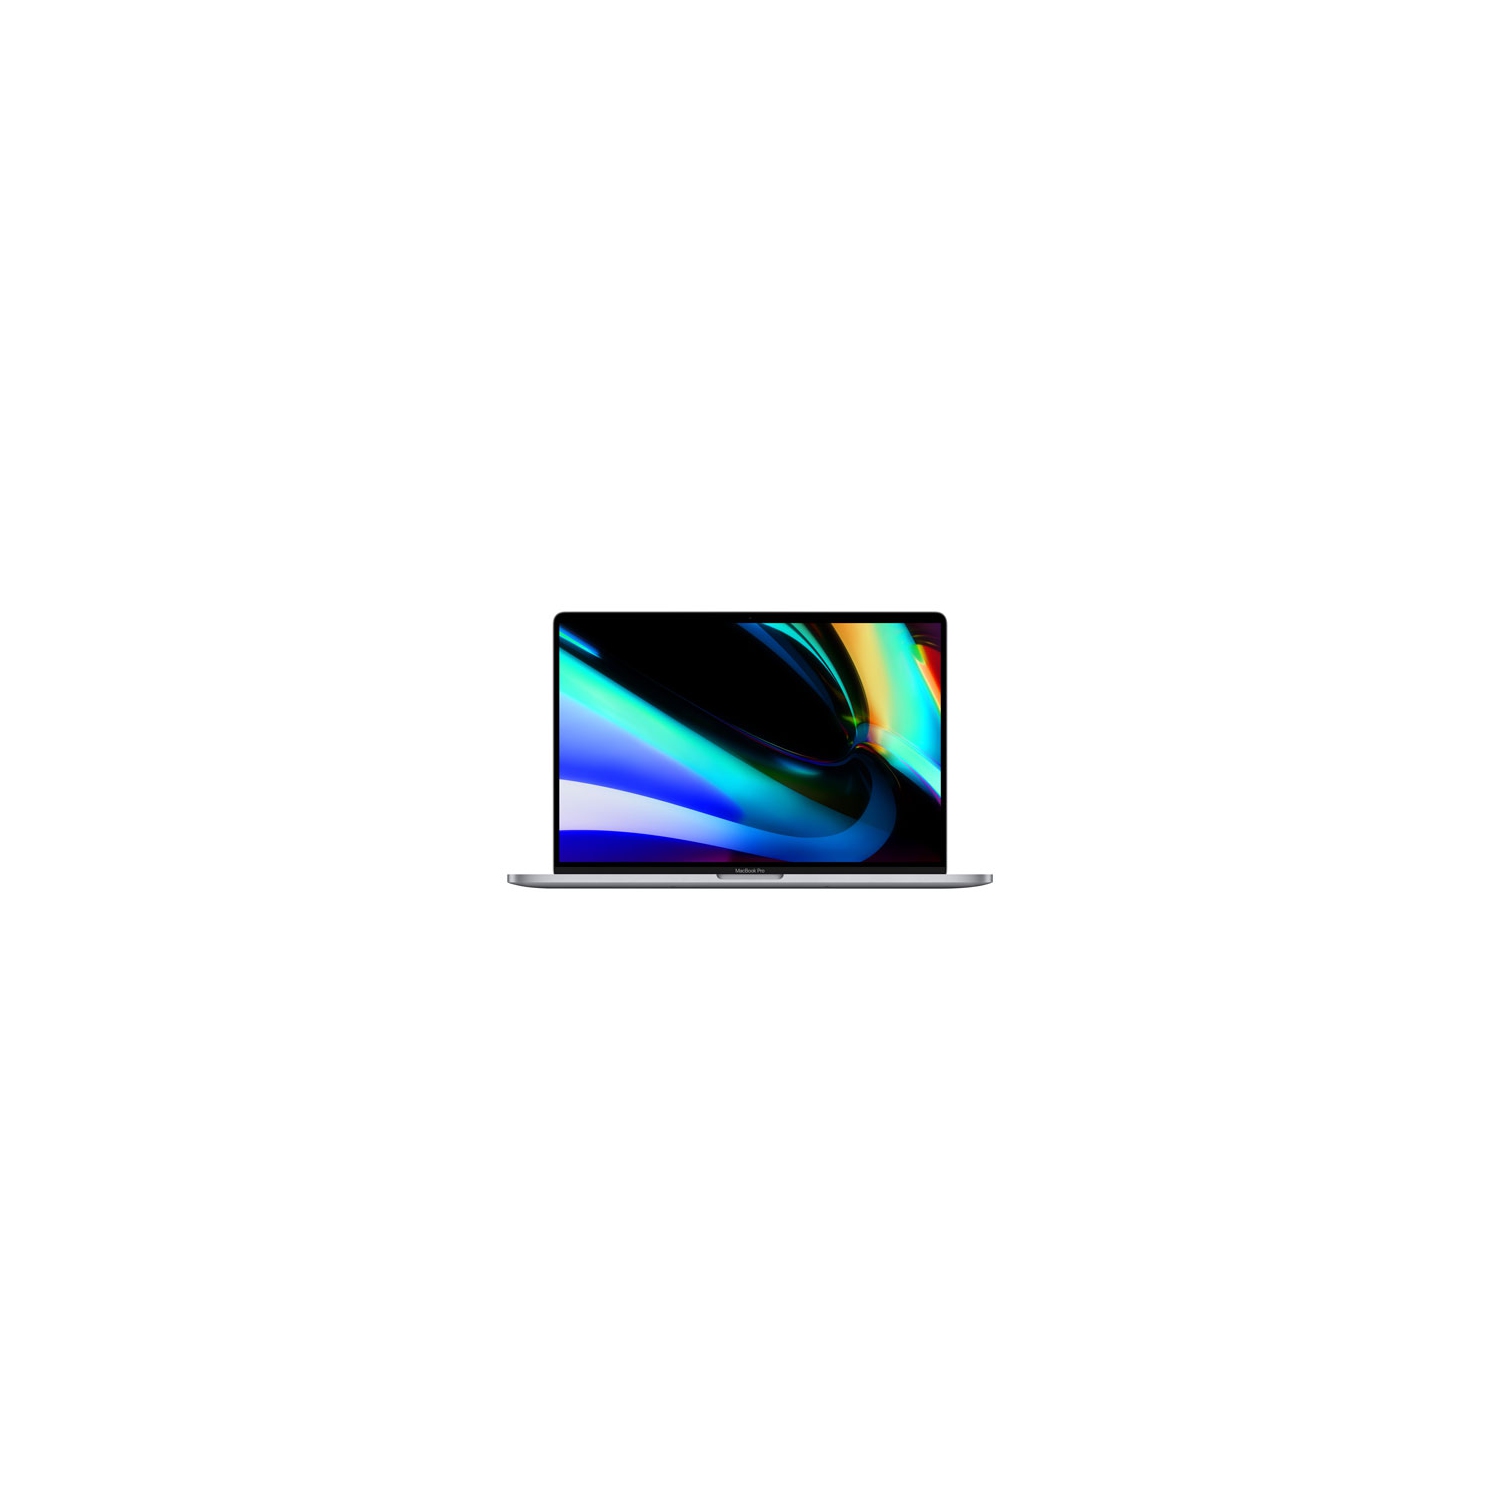 Refurbished (Excellent) - Apple MacBook Pro 16" w/ Touch Bar (2019) - Space Grey (Intel Core i9 2.3GHz/1TB SSD/16GB RAM) - English - Certified Refurbished